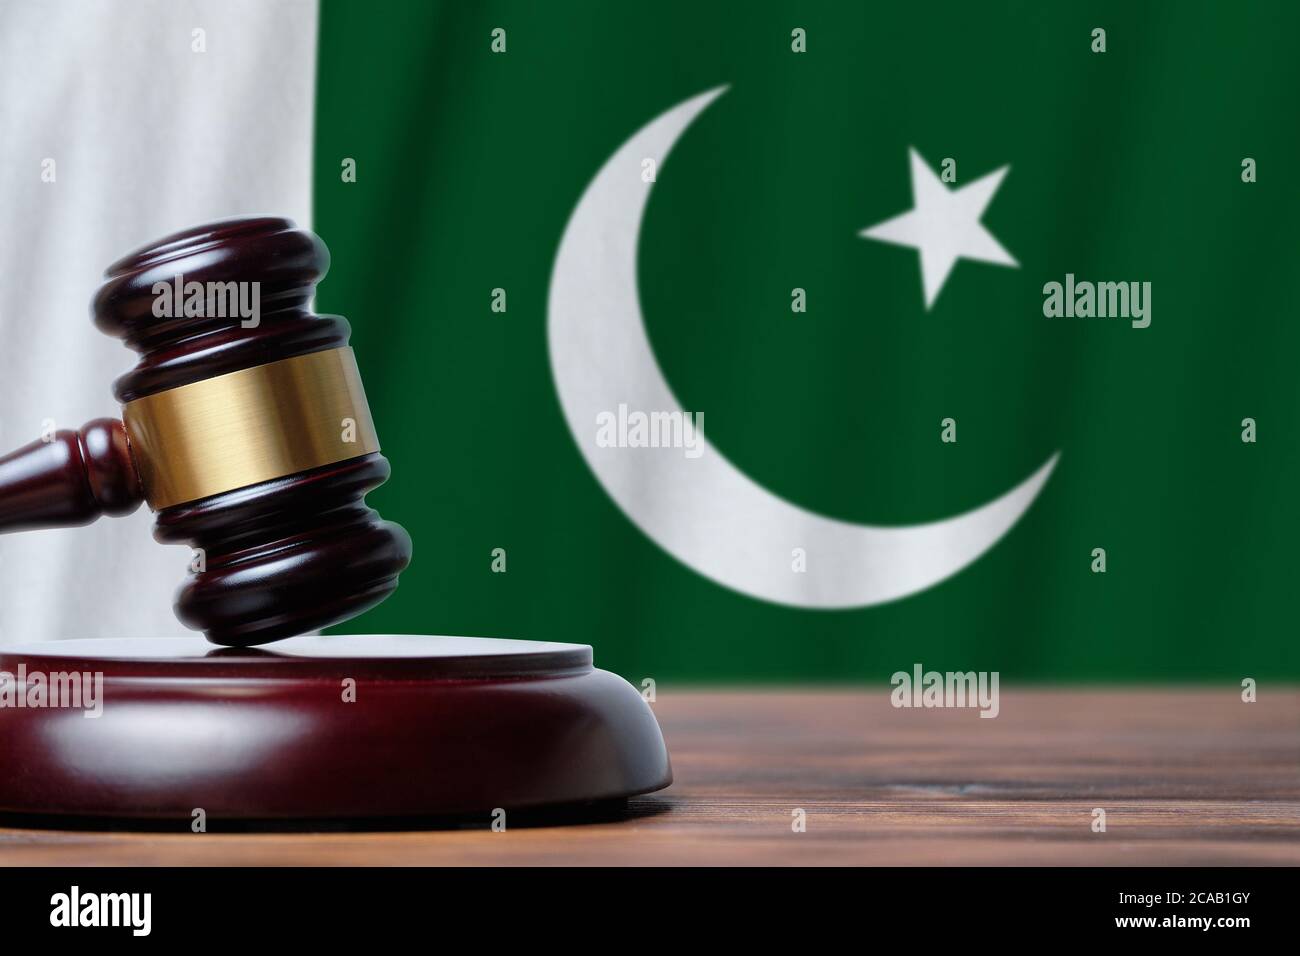 Justice and court concept in Islamic Republic of Pakistan. Judge hammer on a flag background. Stock Photo